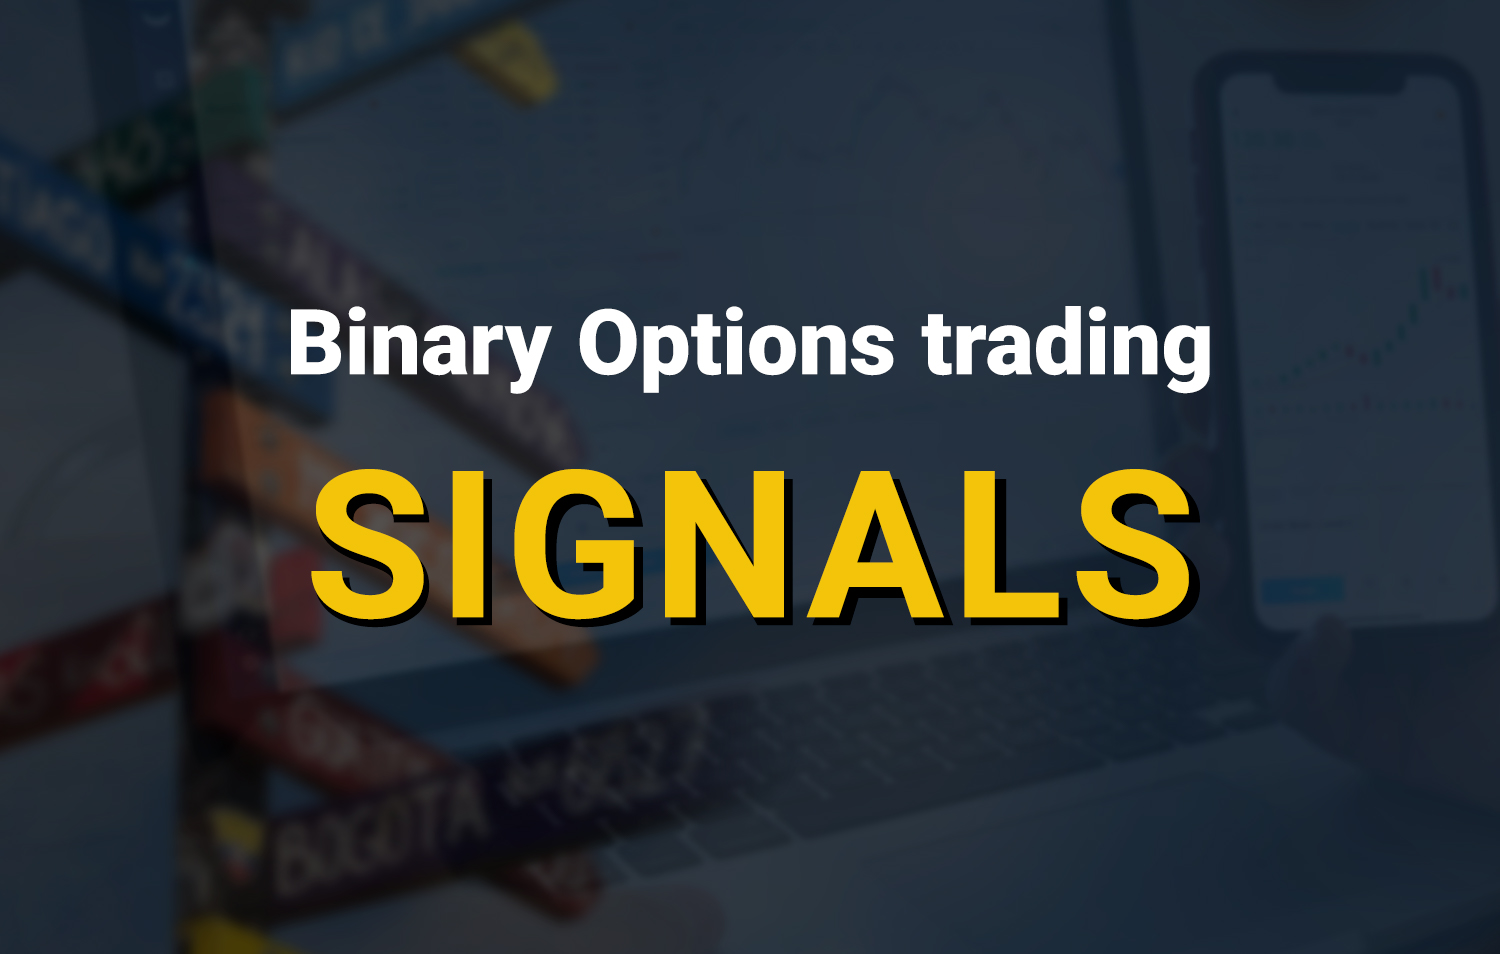 All about Binary Options trading signals